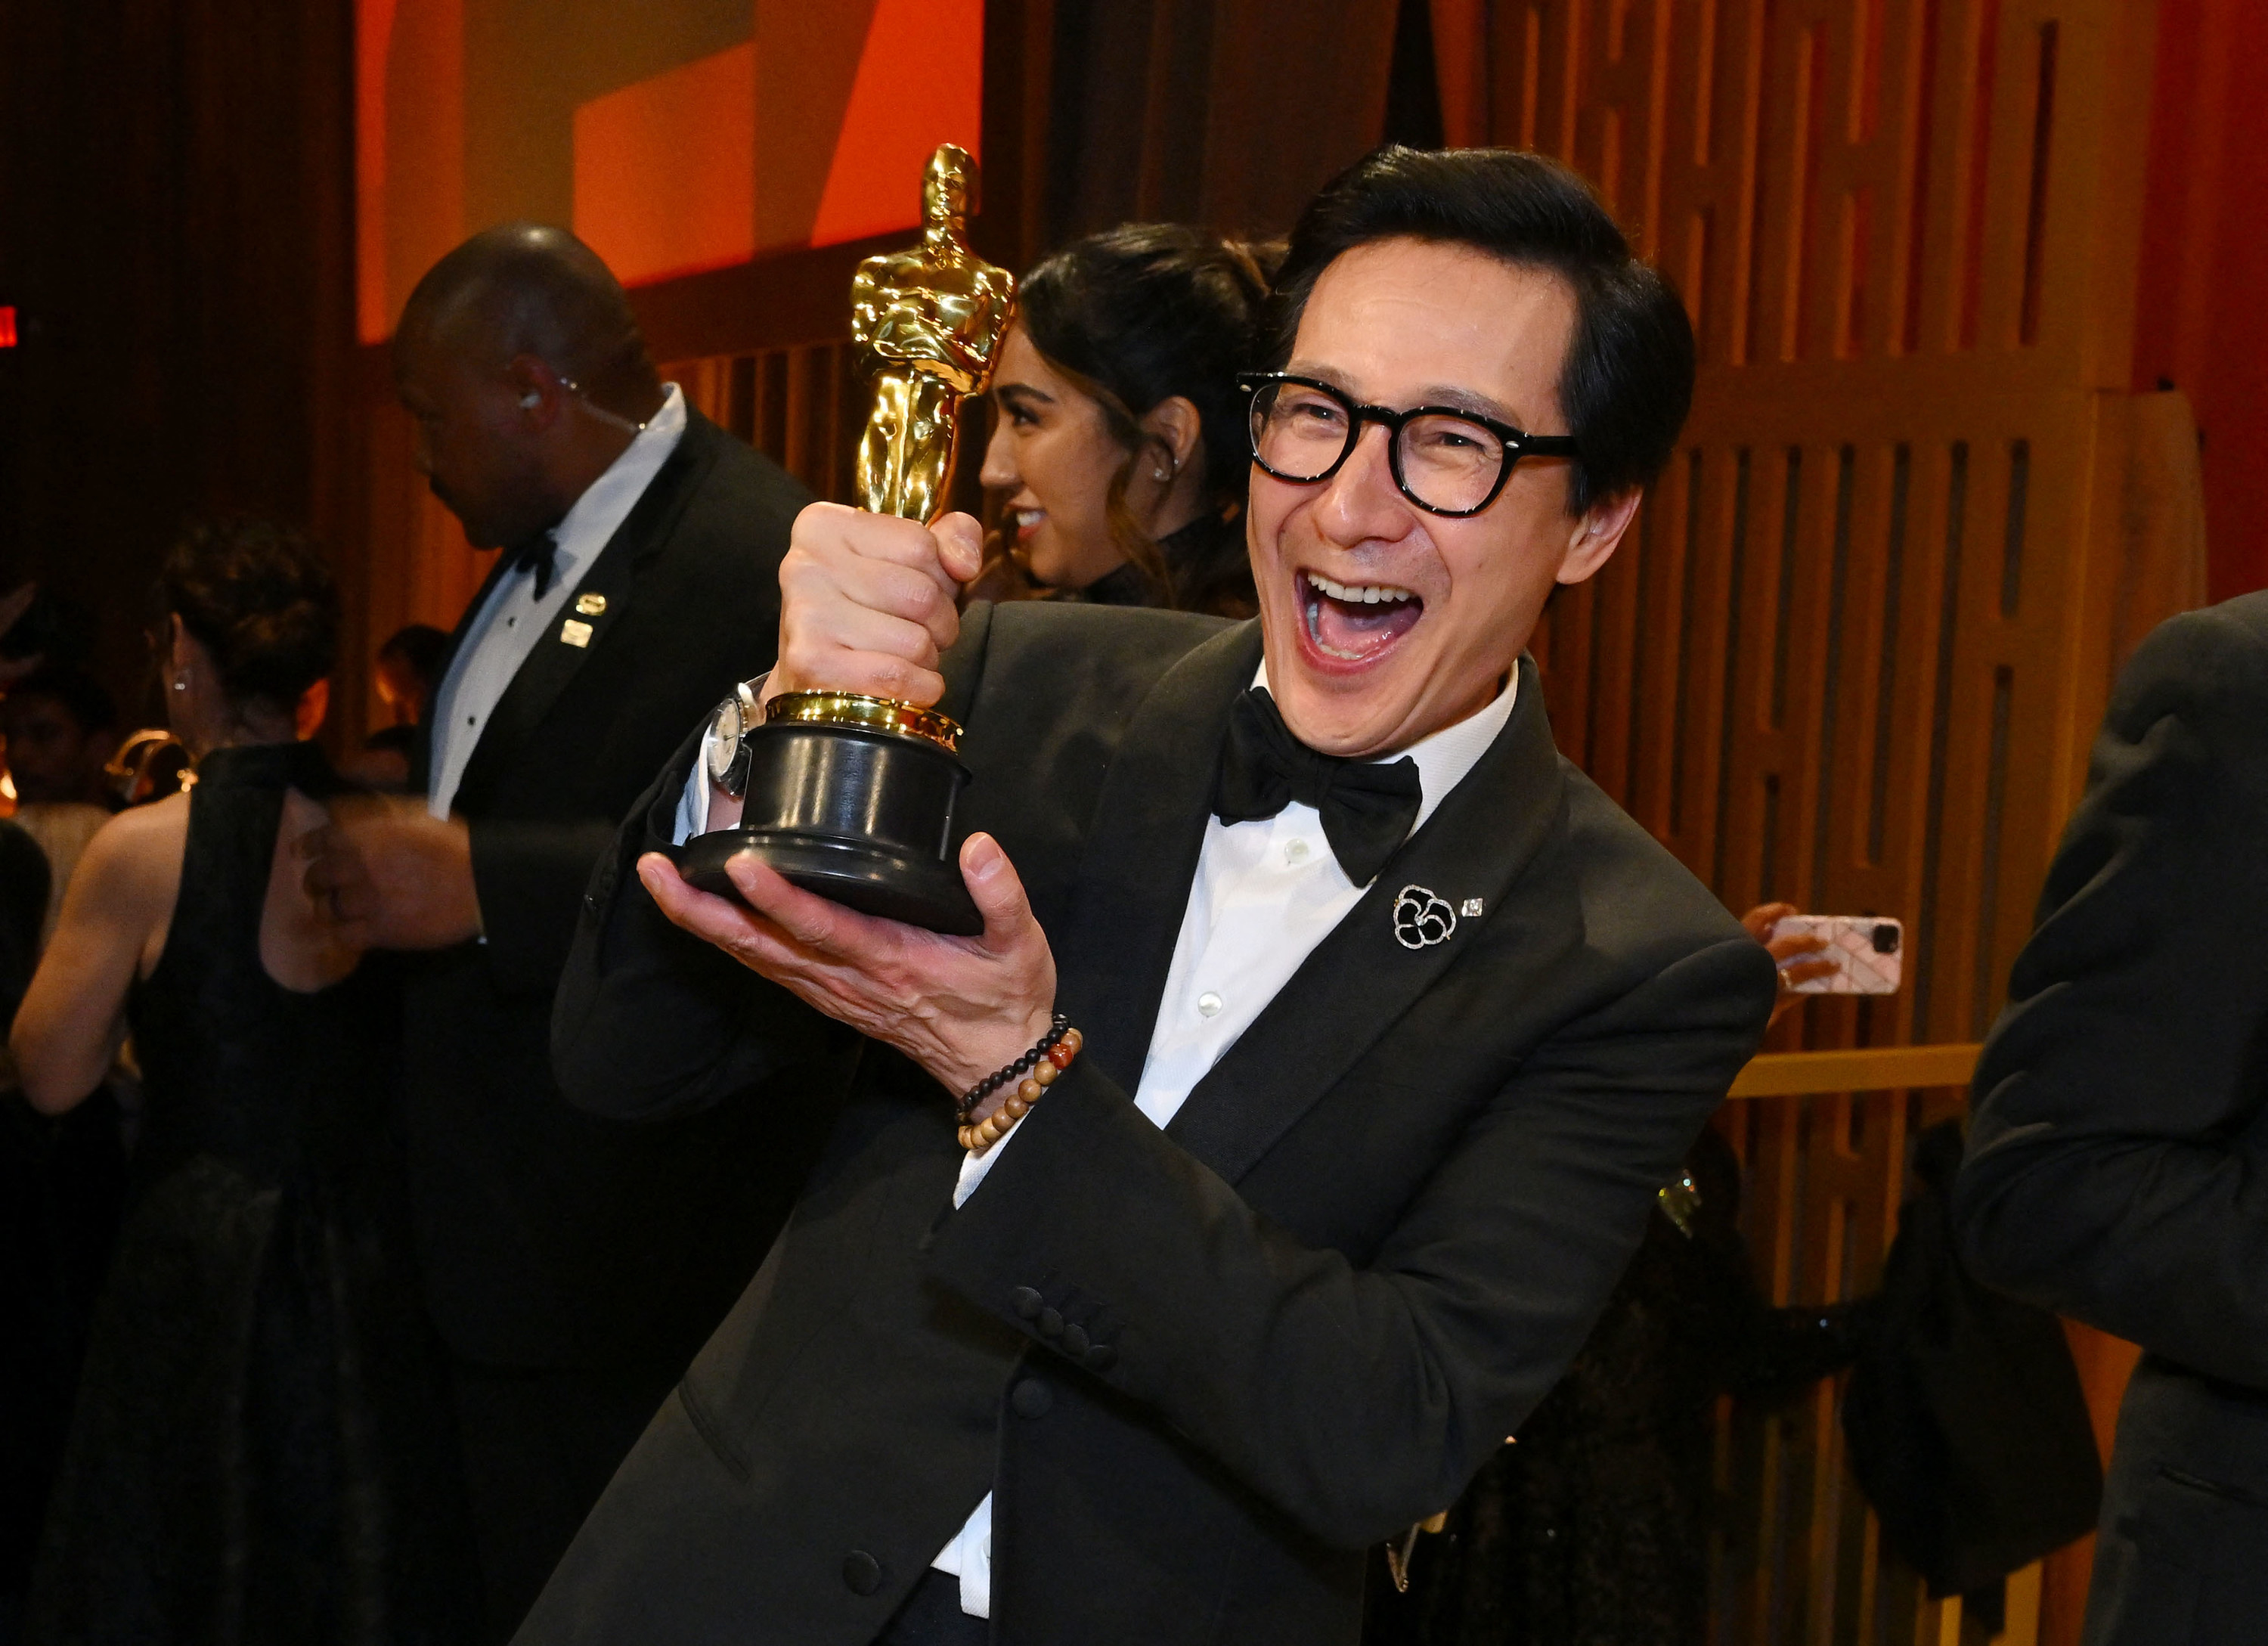 Ke Huy Quan smiles widely while holding up his Oscar